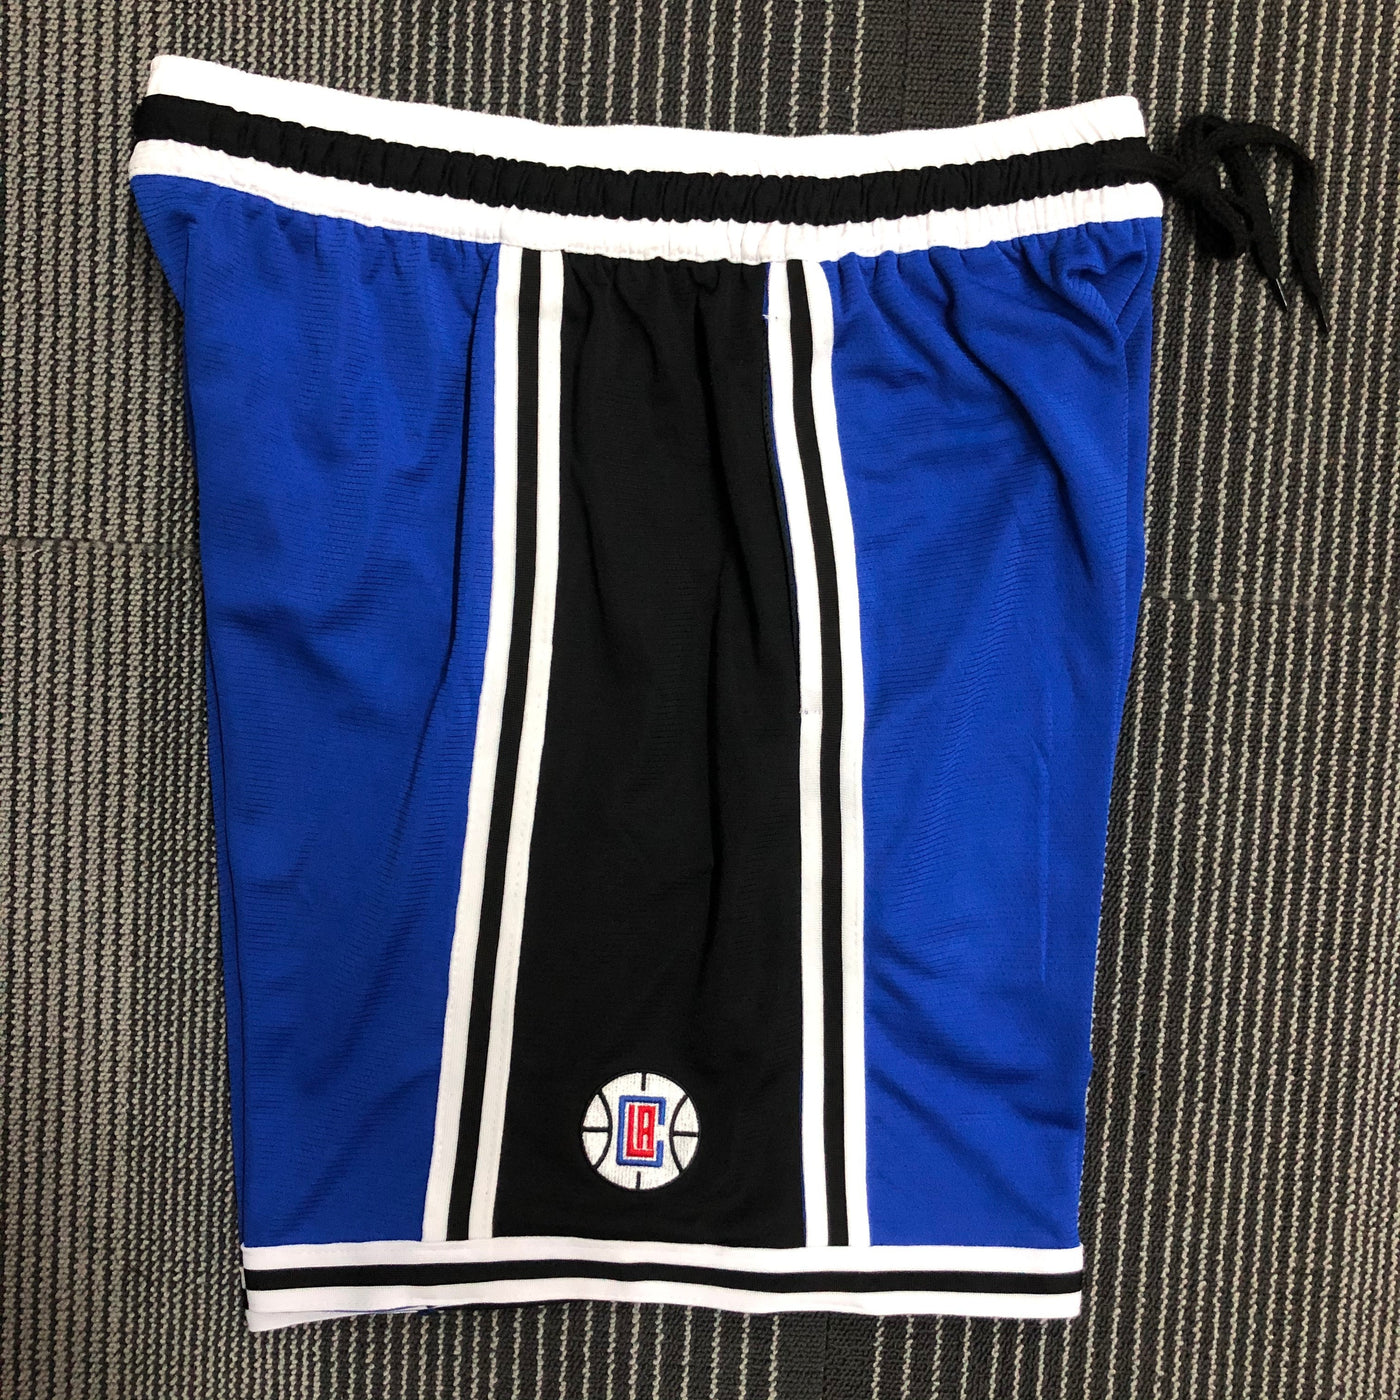 SHORTS Los Angeles Clippers